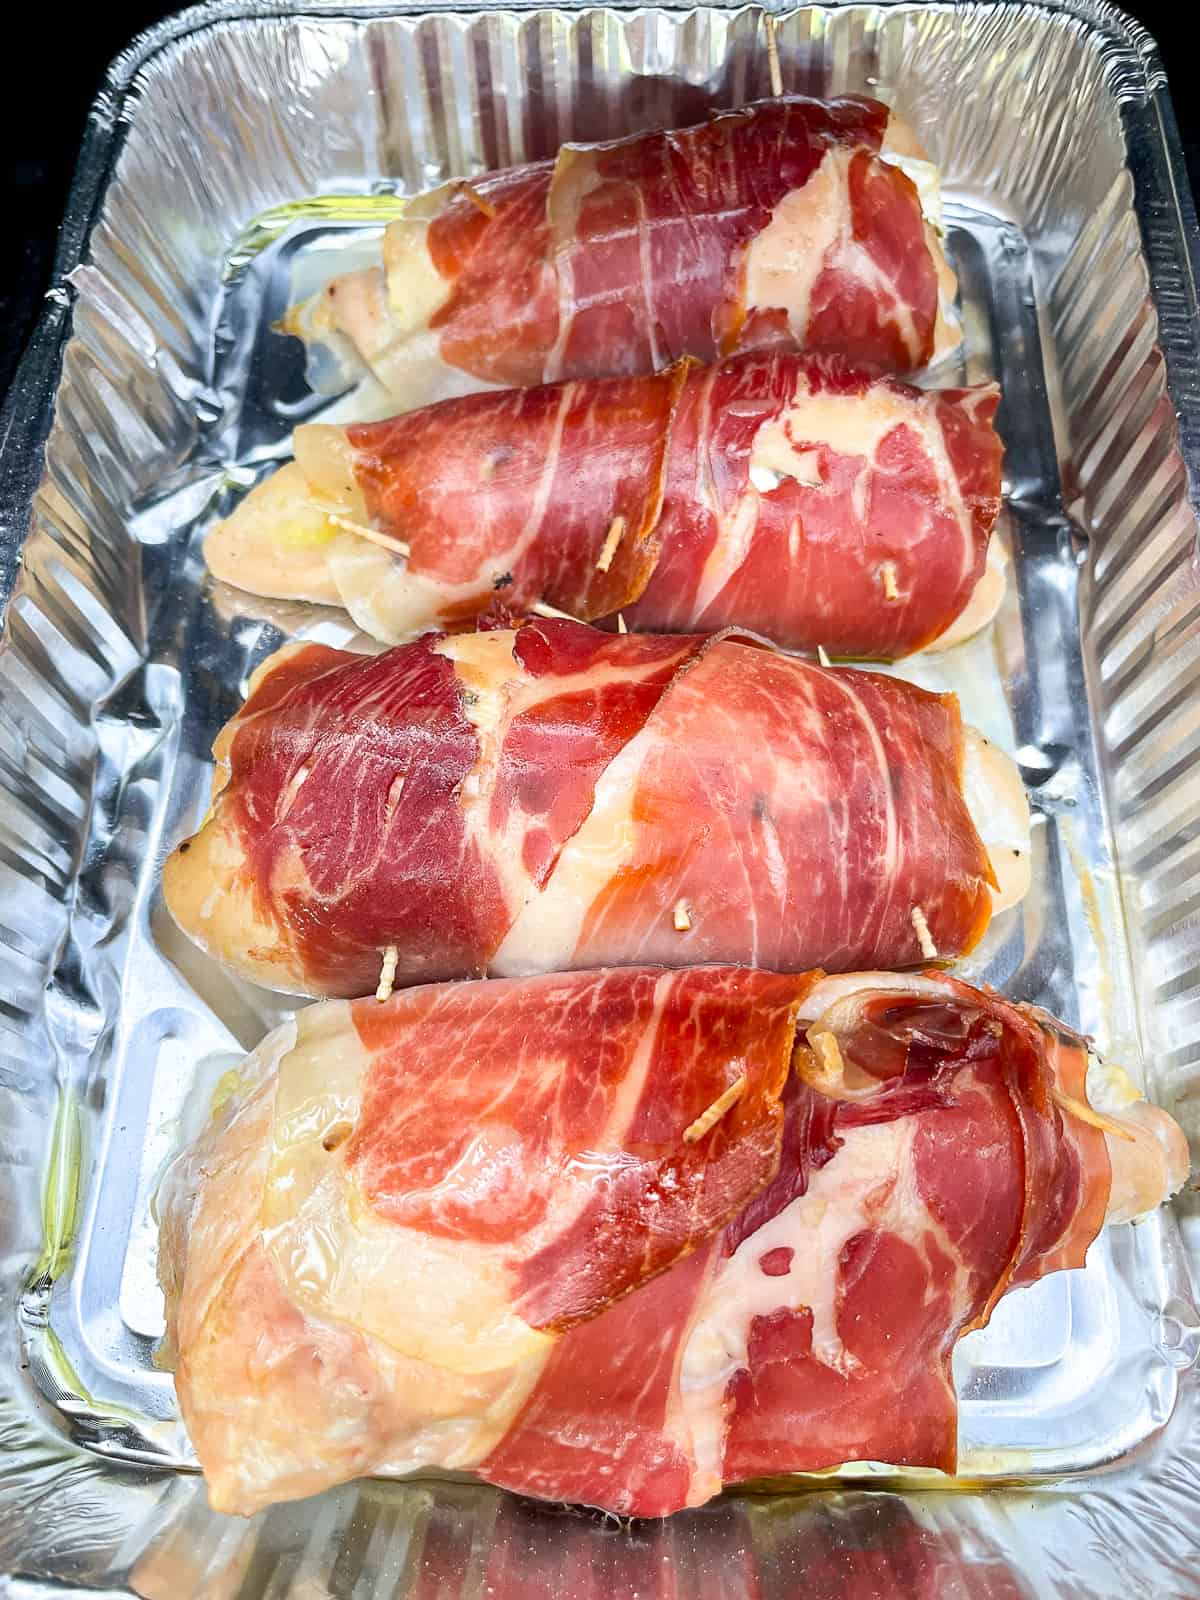 The smoked parma ham chicken stuffed with goat cheese.